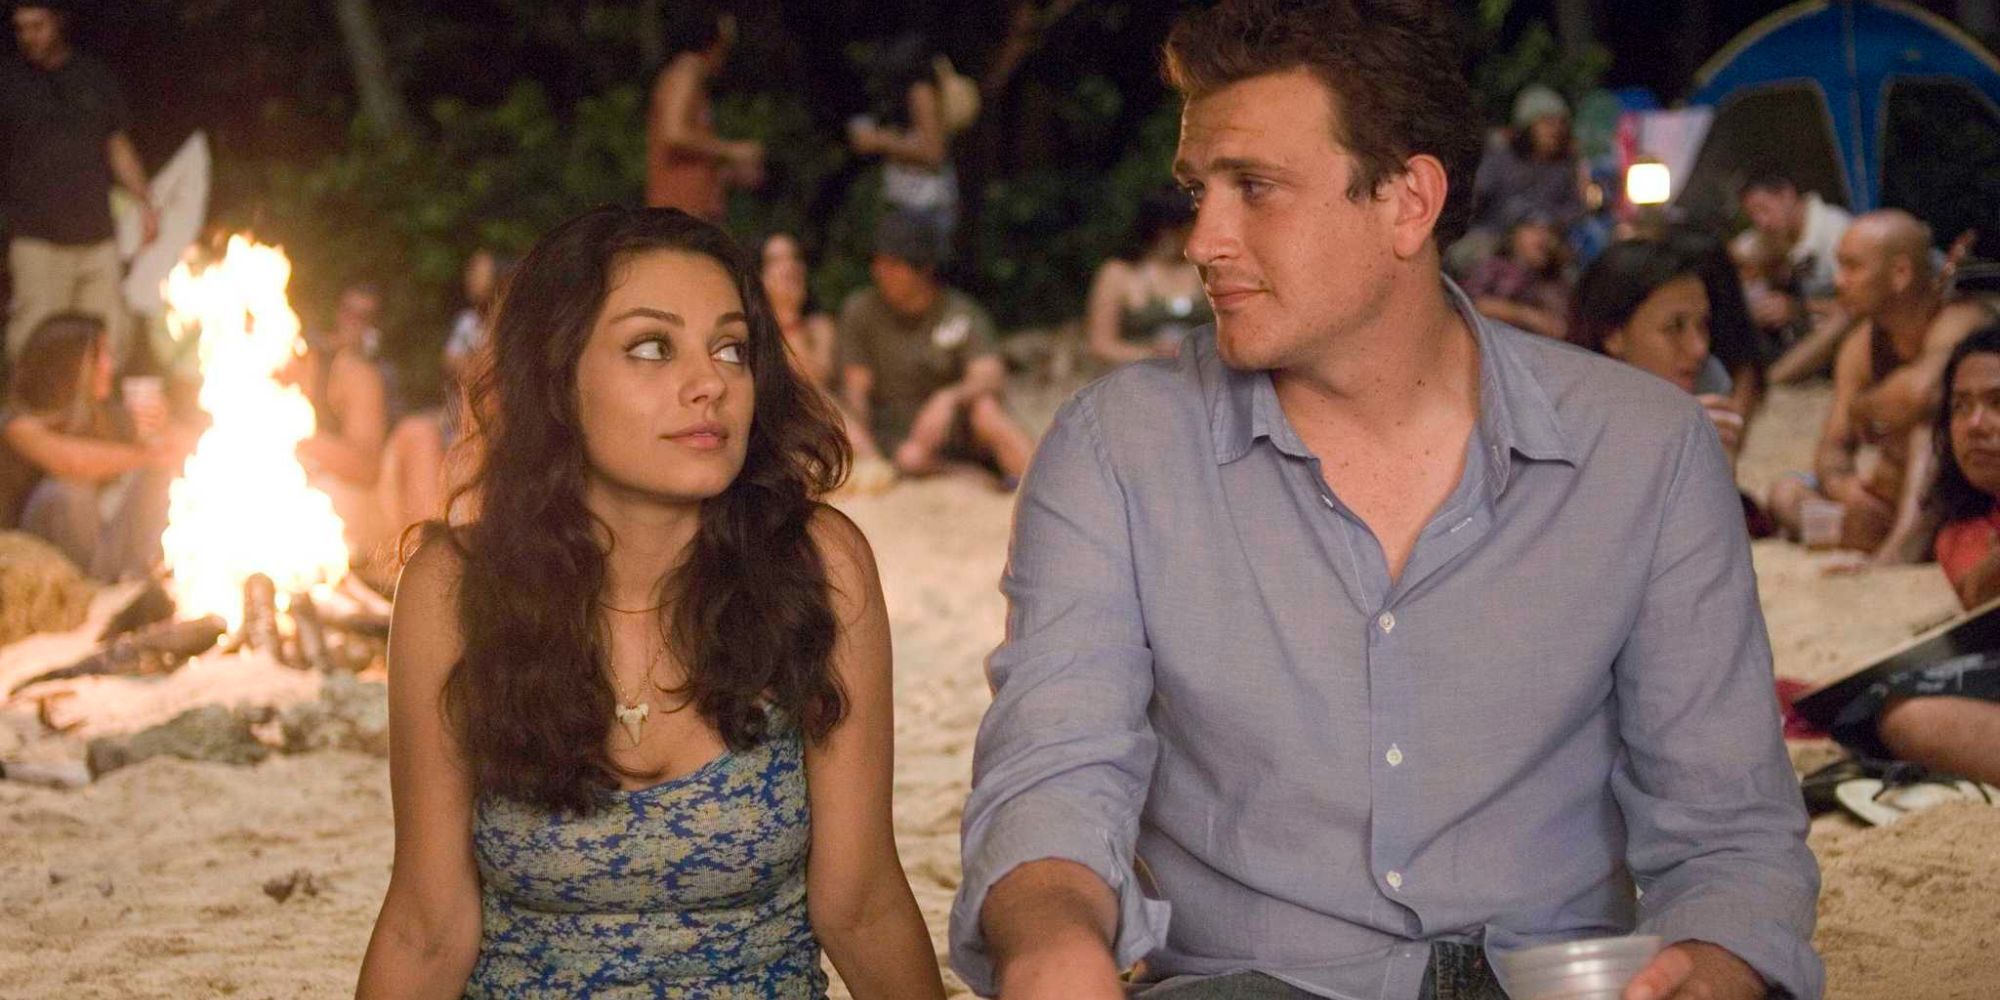 Mila Kunis and Jason Segel sitting together in Forgetting Sarah Marshall